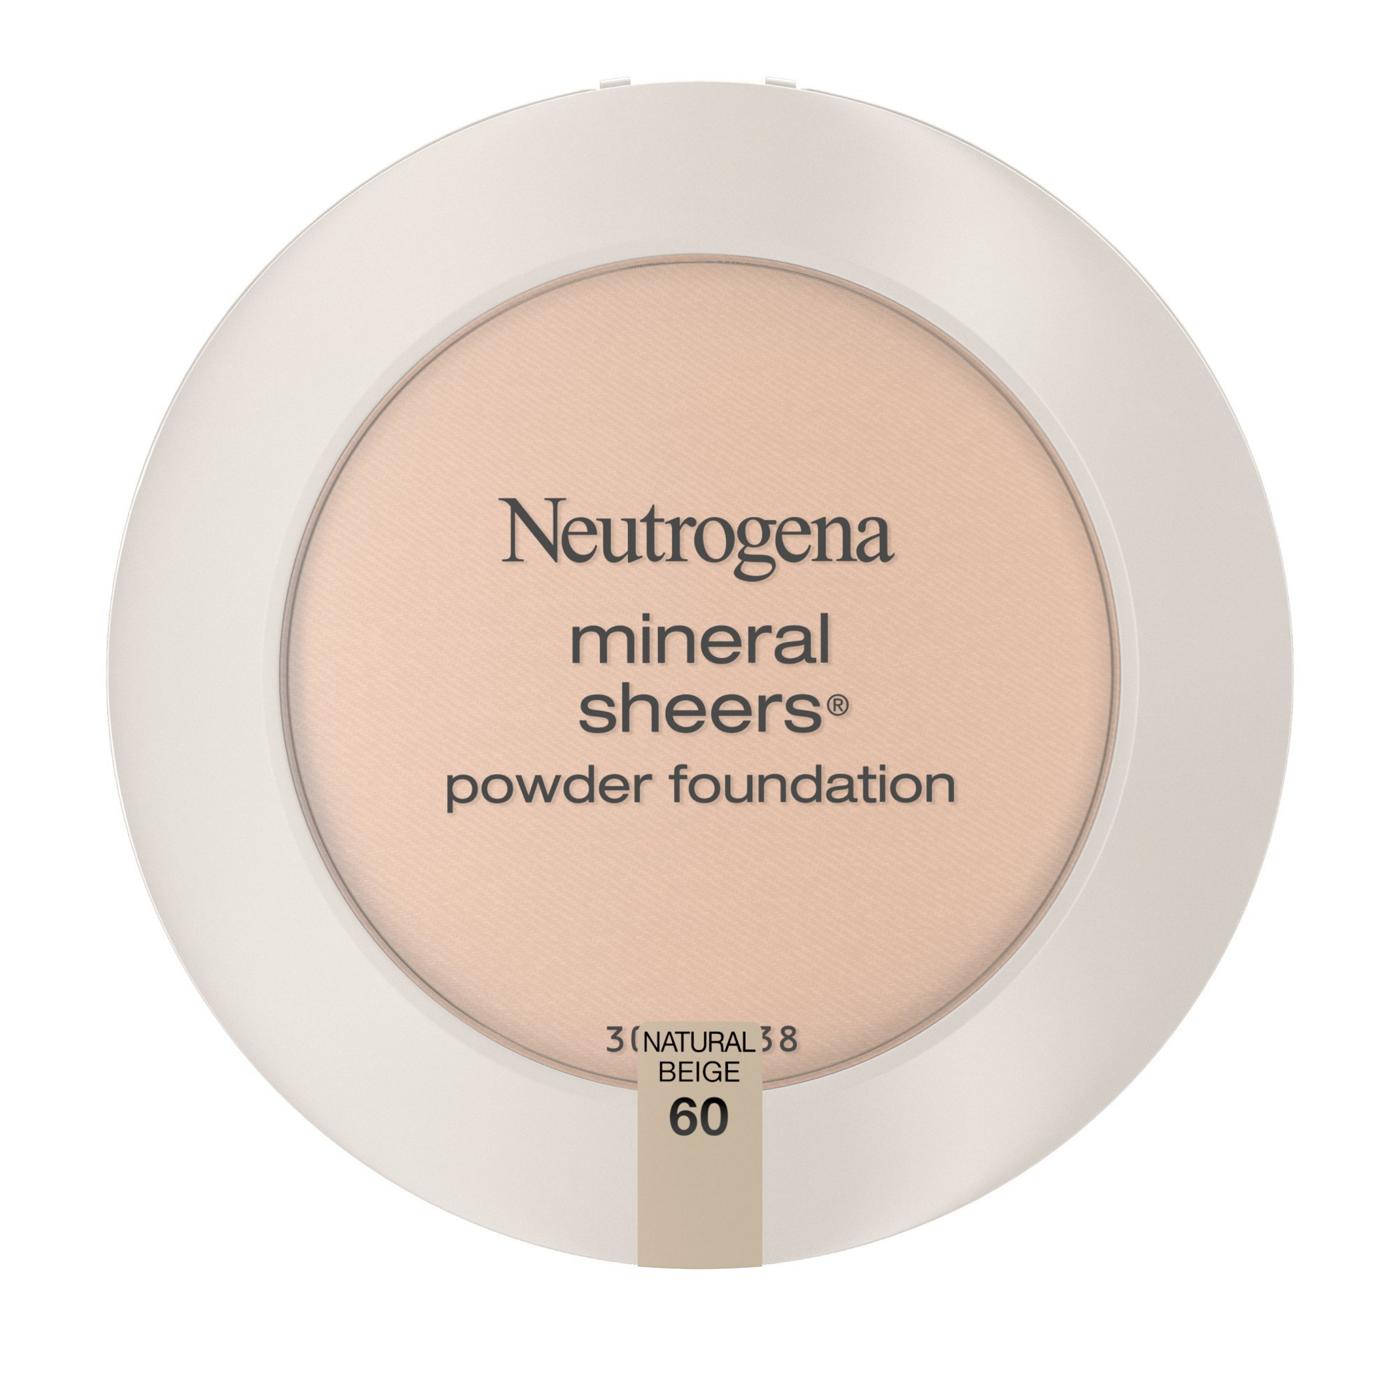 Neutrogena Mineral Sheers 60 Natural Beige Compact Powder Foundation; image 1 of 6